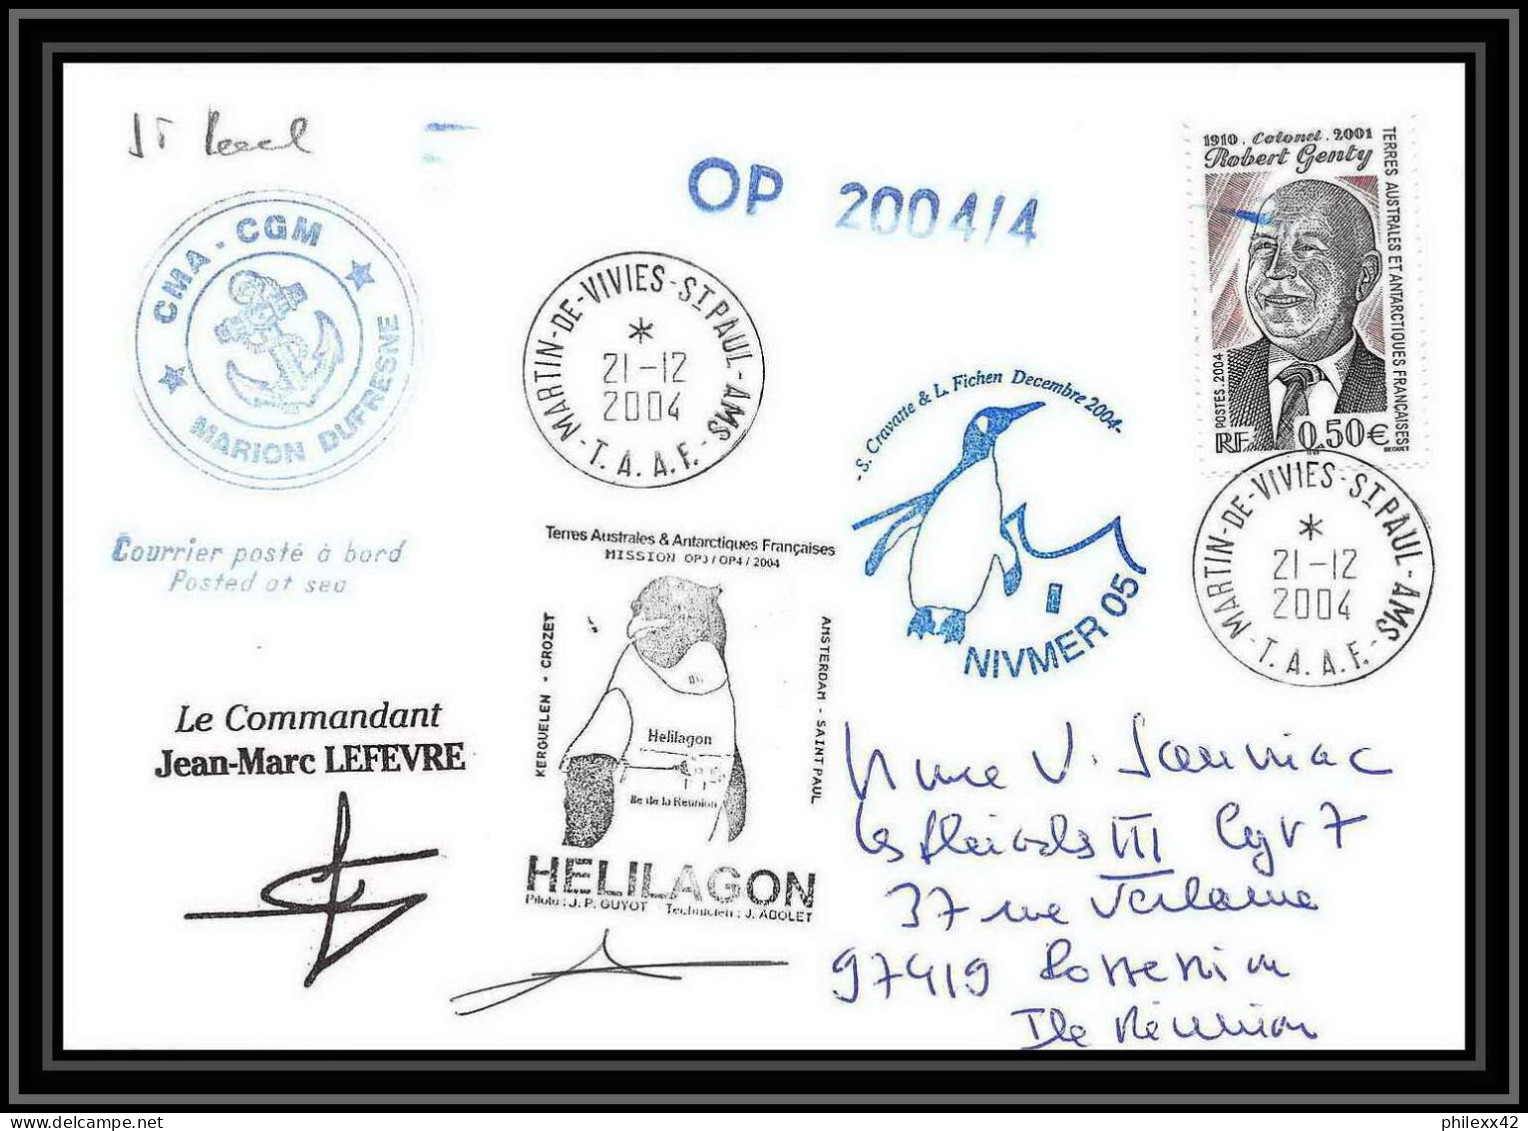 2480 ANTARCTIC Terres Australes TAAF Lettre Cover Dufresne 2 Signé Signed OP 2004/4 N°392 21/12/2004 Helilagon - Hélicoptères